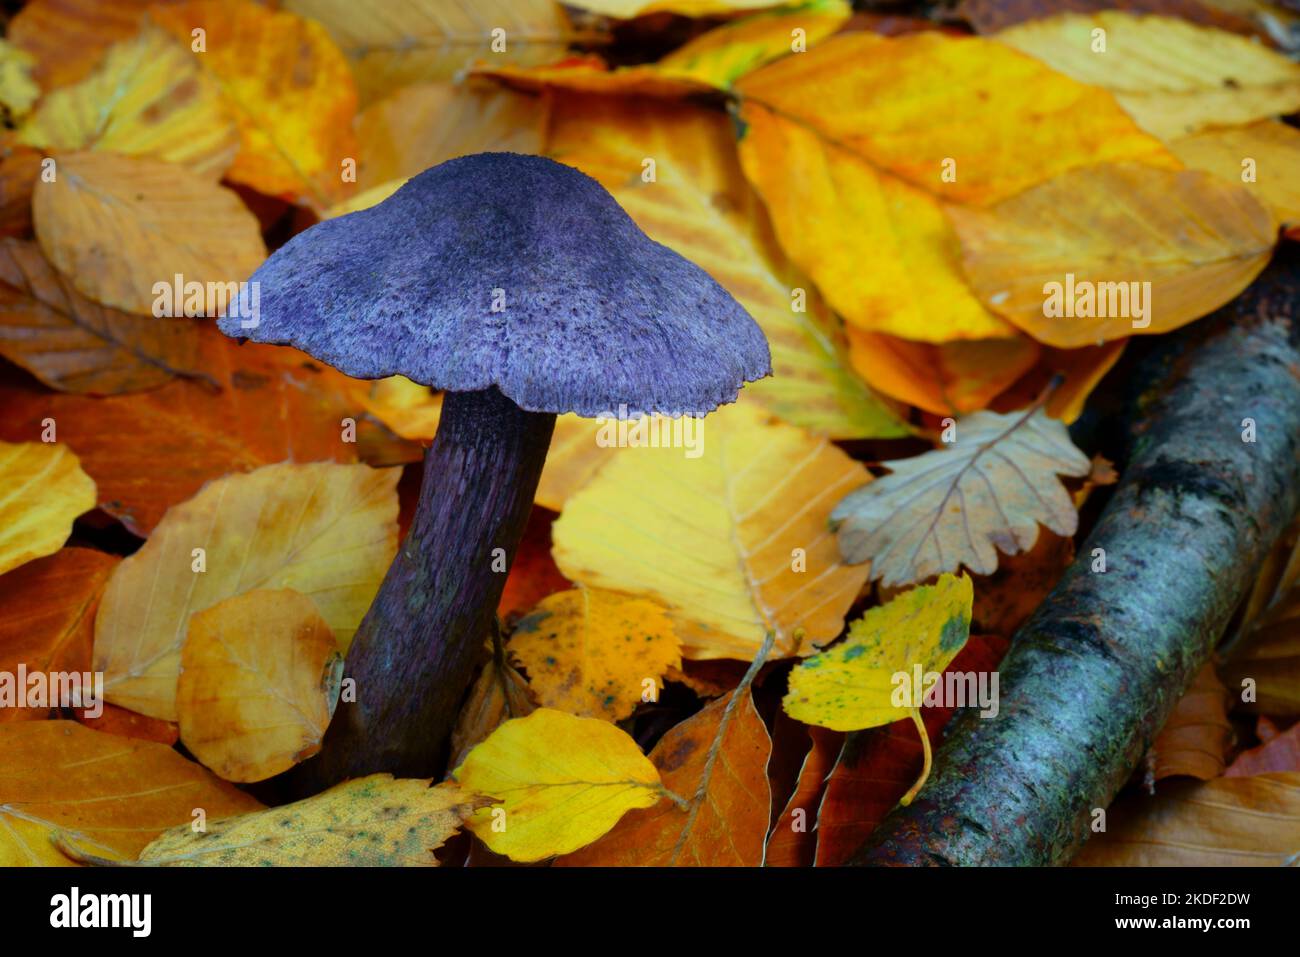 Violet webcap fungi with autumn leaves. Stock Photo